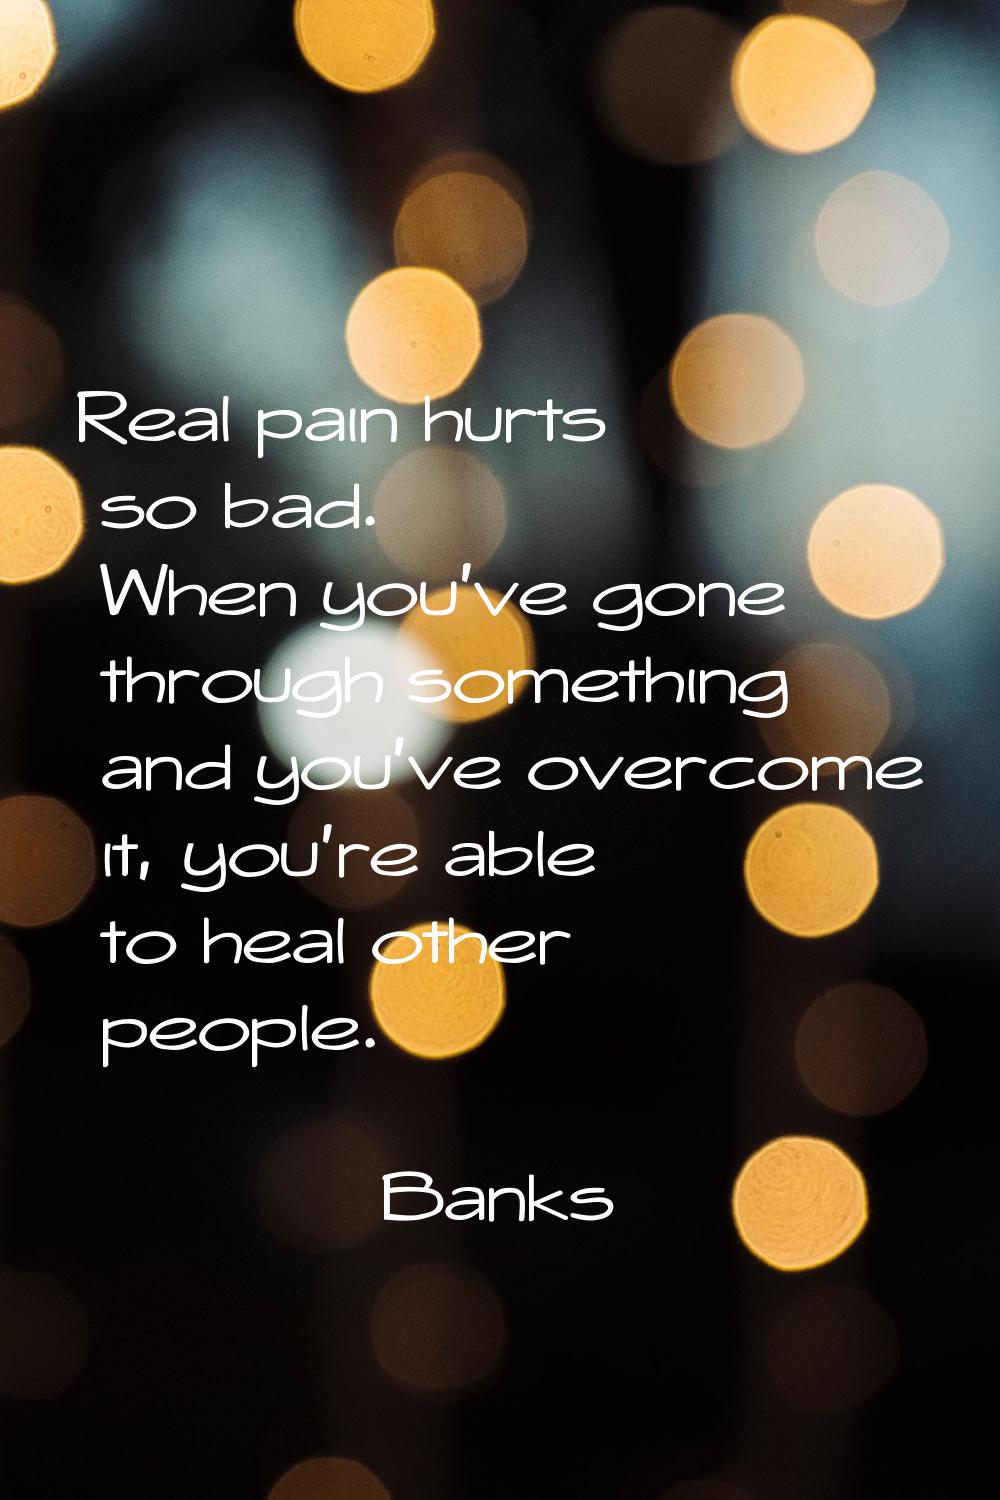 Real pain hurts so bad. When you've gone through something and you've overcome it, you're able to h